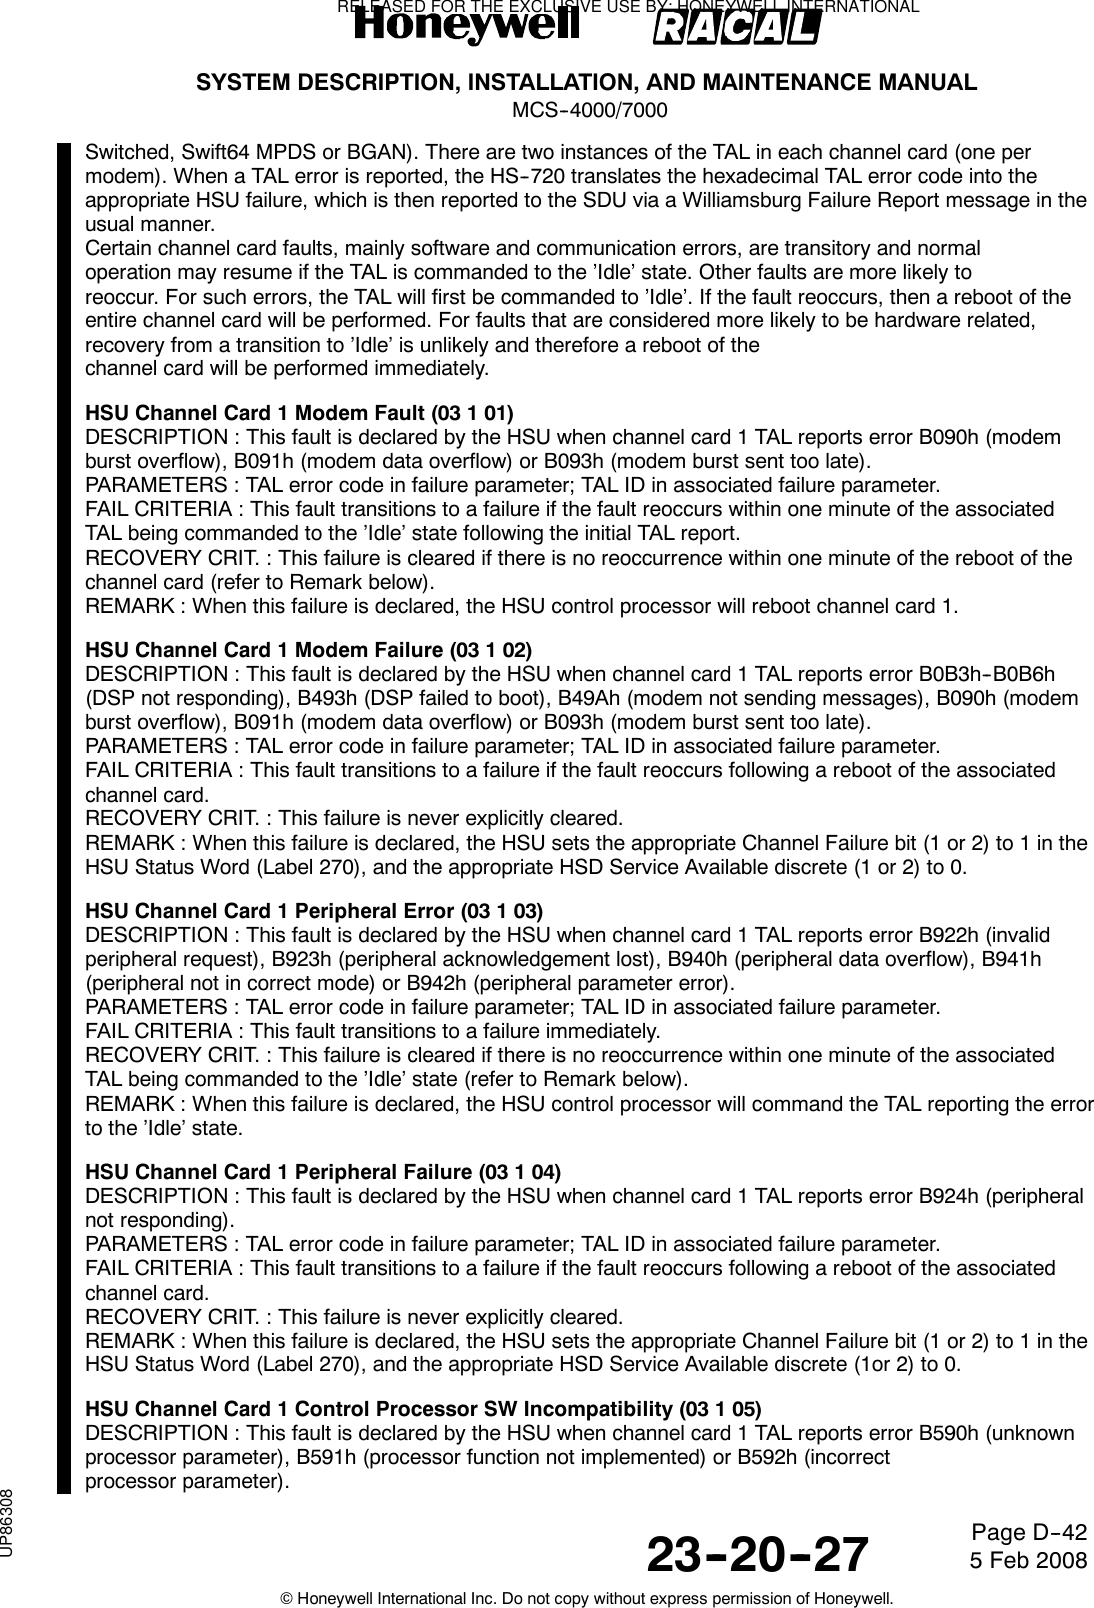 SYSTEM DESCRIPTION, INSTALLATION, AND MAINTENANCE MANUALMCS--4000/700023--20--27 5 Feb 2008©Honeywell International Inc. Do not copy without express permission of Honeywell.Page D--42Switched, Swift64 MPDS or BGAN). There are two instances of the TAL in each channel card (one permodem). When a TAL error is reported, the HS--720 translates the hexadecimal TAL error code into theappropriate HSU failure, which is then reported to the SDU via a Williamsburg Failure Report message in theusual manner.Certain channel card faults, mainly software and communication errors, are transitory and normaloperation may resume if the TAL is commanded to the ’Idle’ state. Other faults are more likely toreoccur. For such errors, the TAL will first be commanded to ’Idle’. If the fault reoccurs, then a reboot of theentire channel card will be performed. For faults that are considered more likely to be hardware related,recovery from a transition to ’Idle’ is unlikely and therefore a reboot of thechannel card will be performed immediately.HSU Channel Card 1 Modem Fault (03 1 01)DESCRIPTION : This fault is declared by the HSU when channel card 1 TAL reports error B090h (modemburst overflow), B091h (modem data overflow) or B093h (modem burst sent too late).PARAMETERS : TAL error code in failure parameter; TAL ID in associated failure parameter.FAIL CRITERIA : This fault transitions to a failure if the fault reoccurs within one minute of the associatedTAL being commanded to the ’Idle’ state following the initial TAL report.RECOVERY CRIT. : This failure is cleared if there is no reoccurrence within one minute of the reboot of thechannel card (refer to Remark below).REMARK : When this failure is declared, the HSU control processor will reboot channel card 1.HSU Channel Card 1 Modem Failure (03 1 02)DESCRIPTION : This fault is declared by the HSU when channel card 1 TAL reports error B0B3h--B0B6h(DSP not responding), B493h (DSP failed to boot), B49Ah (modem not sending messages), B090h (modemburst overflow), B091h (modem data overflow) or B093h (modem burst sent too late).PARAMETERS : TAL error code in failure parameter; TAL ID in associated failure parameter.FAIL CRITERIA : This fault transitions to a failure if the fault reoccurs following a reboot of the associatedchannel card.RECOVERY CRIT. : This failure is never explicitly cleared.REMARK : When this failure is declared, the HSU sets the appropriate Channel Failure bit (1 or 2) to 1 in theHSU Status Word (Label 270), and the appropriate HSD Service Available discrete (1 or 2) to 0.HSU Channel Card 1 Peripheral Error (03 1 03)DESCRIPTION : This fault is declared by the HSU when channel card 1 TAL reports error B922h (invalidperipheral request), B923h (peripheral acknowledgement lost), B940h (peripheral data overflow), B941h(peripheral not in correct mode) or B942h (peripheral parameter error).PARAMETERS : TAL error code in failure parameter; TAL ID in associated failure parameter.FAIL CRITERIA : This fault transitions to a failure immediately.RECOVERY CRIT. : This failure is cleared if there is no reoccurrence within one minute of the associatedTAL being commanded to the ’Idle’ state (refer to Remark below).REMARK : When this failure is declared, the HSU control processor will command the TAL reporting the errorto the ’Idle’ state.HSU Channel Card 1 Peripheral Failure (03 1 04)DESCRIPTION : This fault is declared by the HSU when channel card 1 TAL reports error B924h (peripheralnot responding).PARAMETERS : TAL error code in failure parameter; TAL ID in associated failure parameter.FAIL CRITERIA : This fault transitions to a failure if the fault reoccurs following a reboot of the associatedchannel card.RECOVERY CRIT. : This failure is never explicitly cleared.REMARK : When this failure is declared, the HSU sets the appropriate Channel Failure bit (1 or 2) to 1 in theHSU Status Word (Label 270), and the appropriate HSD Service Available discrete (1or 2) to 0.HSU Channel Card 1 Control Processor SW Incompatibility (03 1 05)DESCRIPTION : This fault is declared by the HSU when channel card 1 TAL reports error B590h (unknownprocessor parameter), B591h (processor function not implemented) or B592h (incorrectprocessor parameter).RELEASED FOR THE EXCLUSIVE USE BY: HONEYWELL INTERNATIONALUP86308